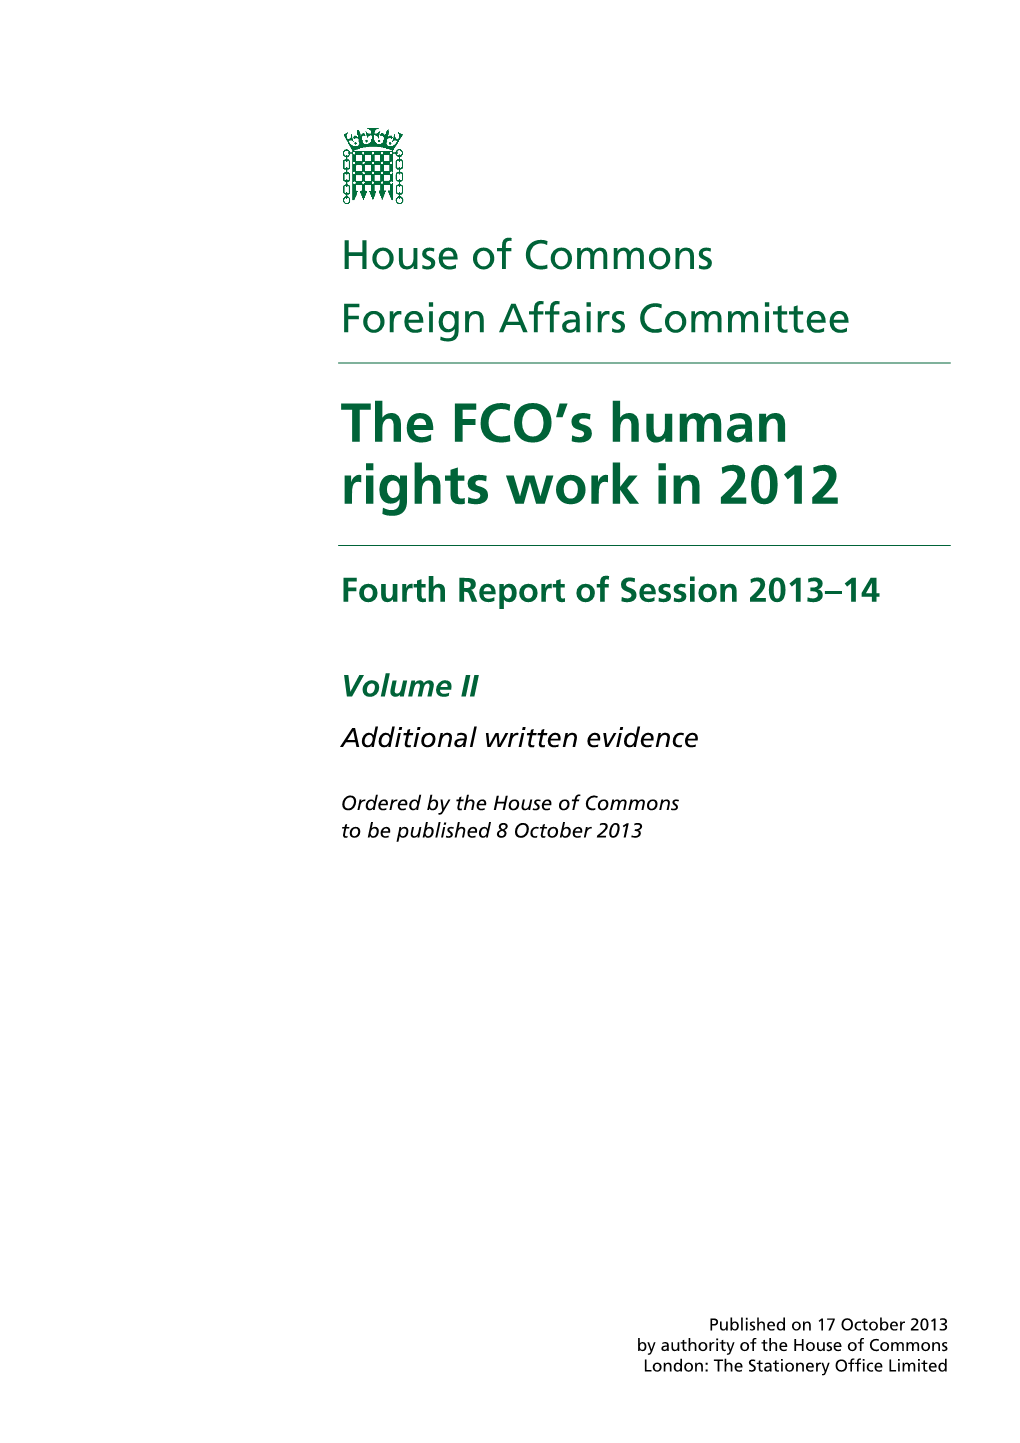 The FCO's Human Rights Work in 2012